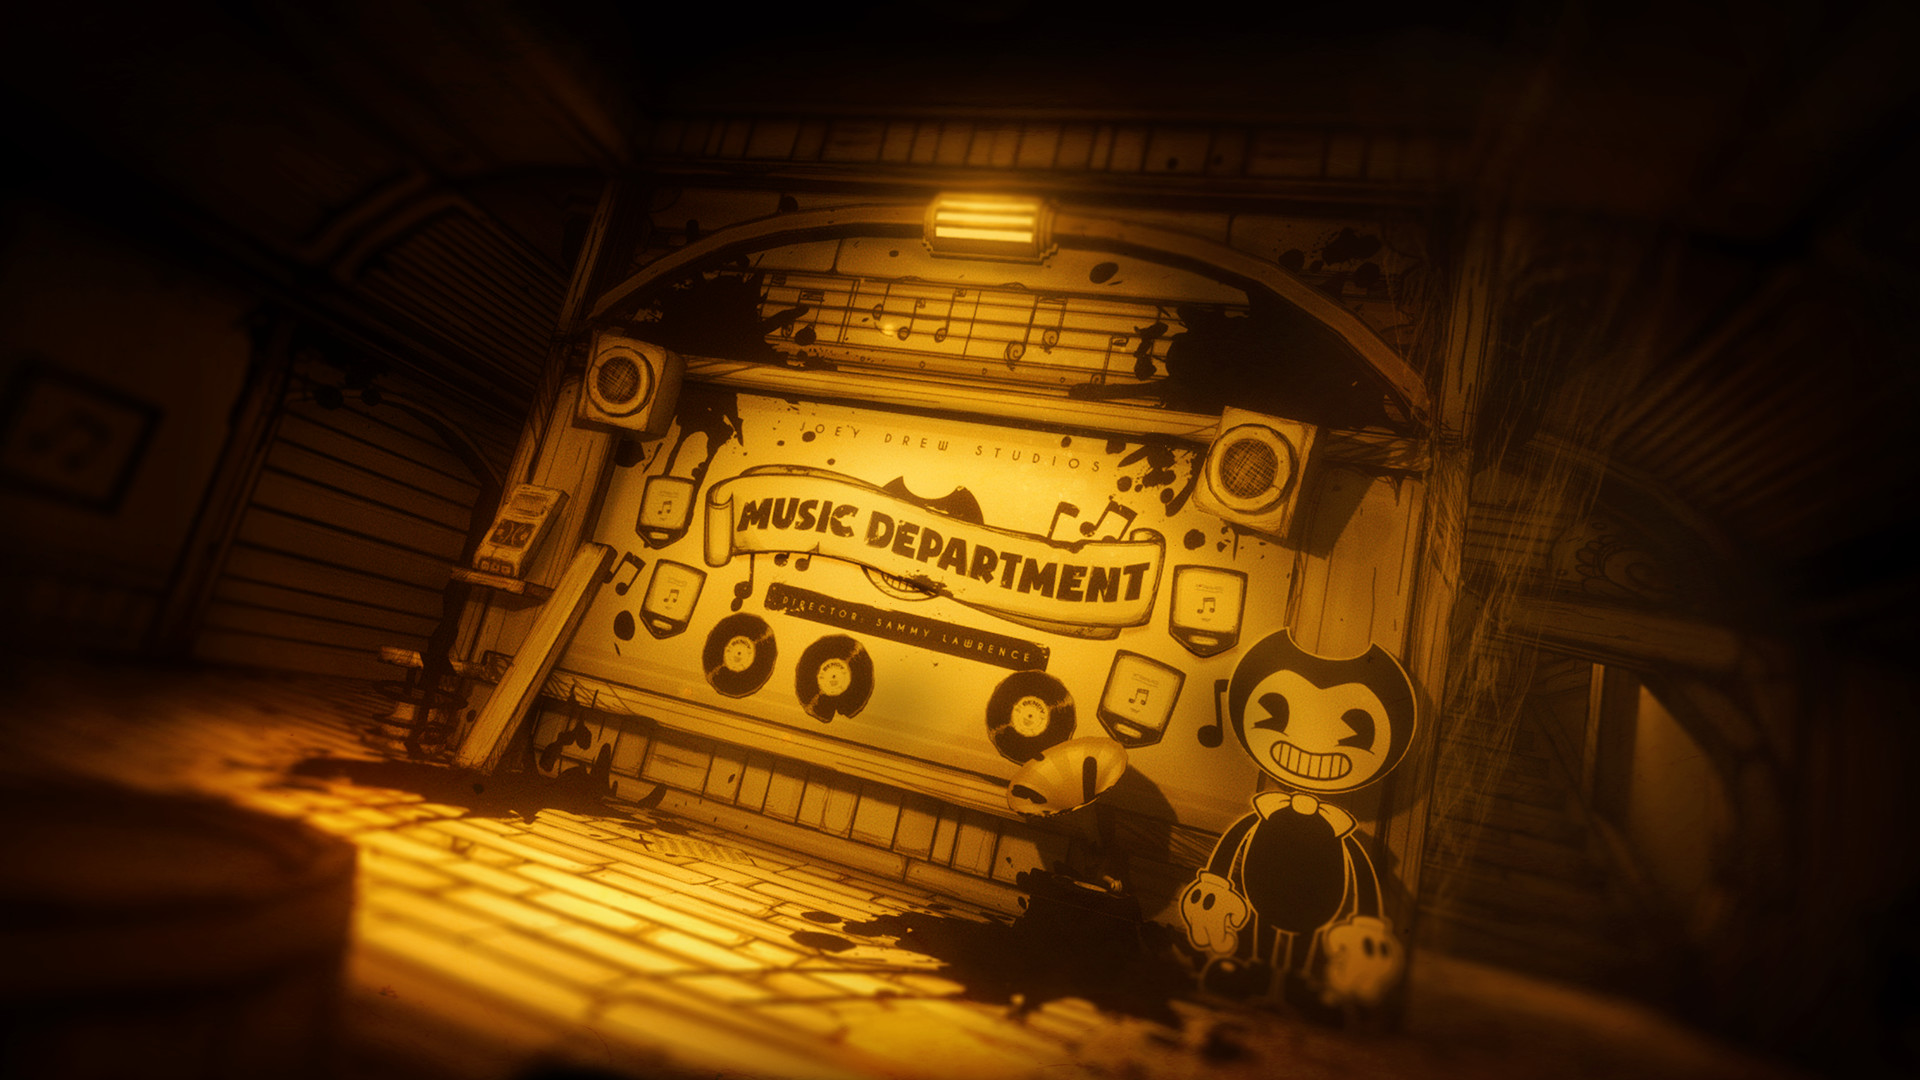 download Bendy and the Ink Machine Complete Edition Torrent via torrent